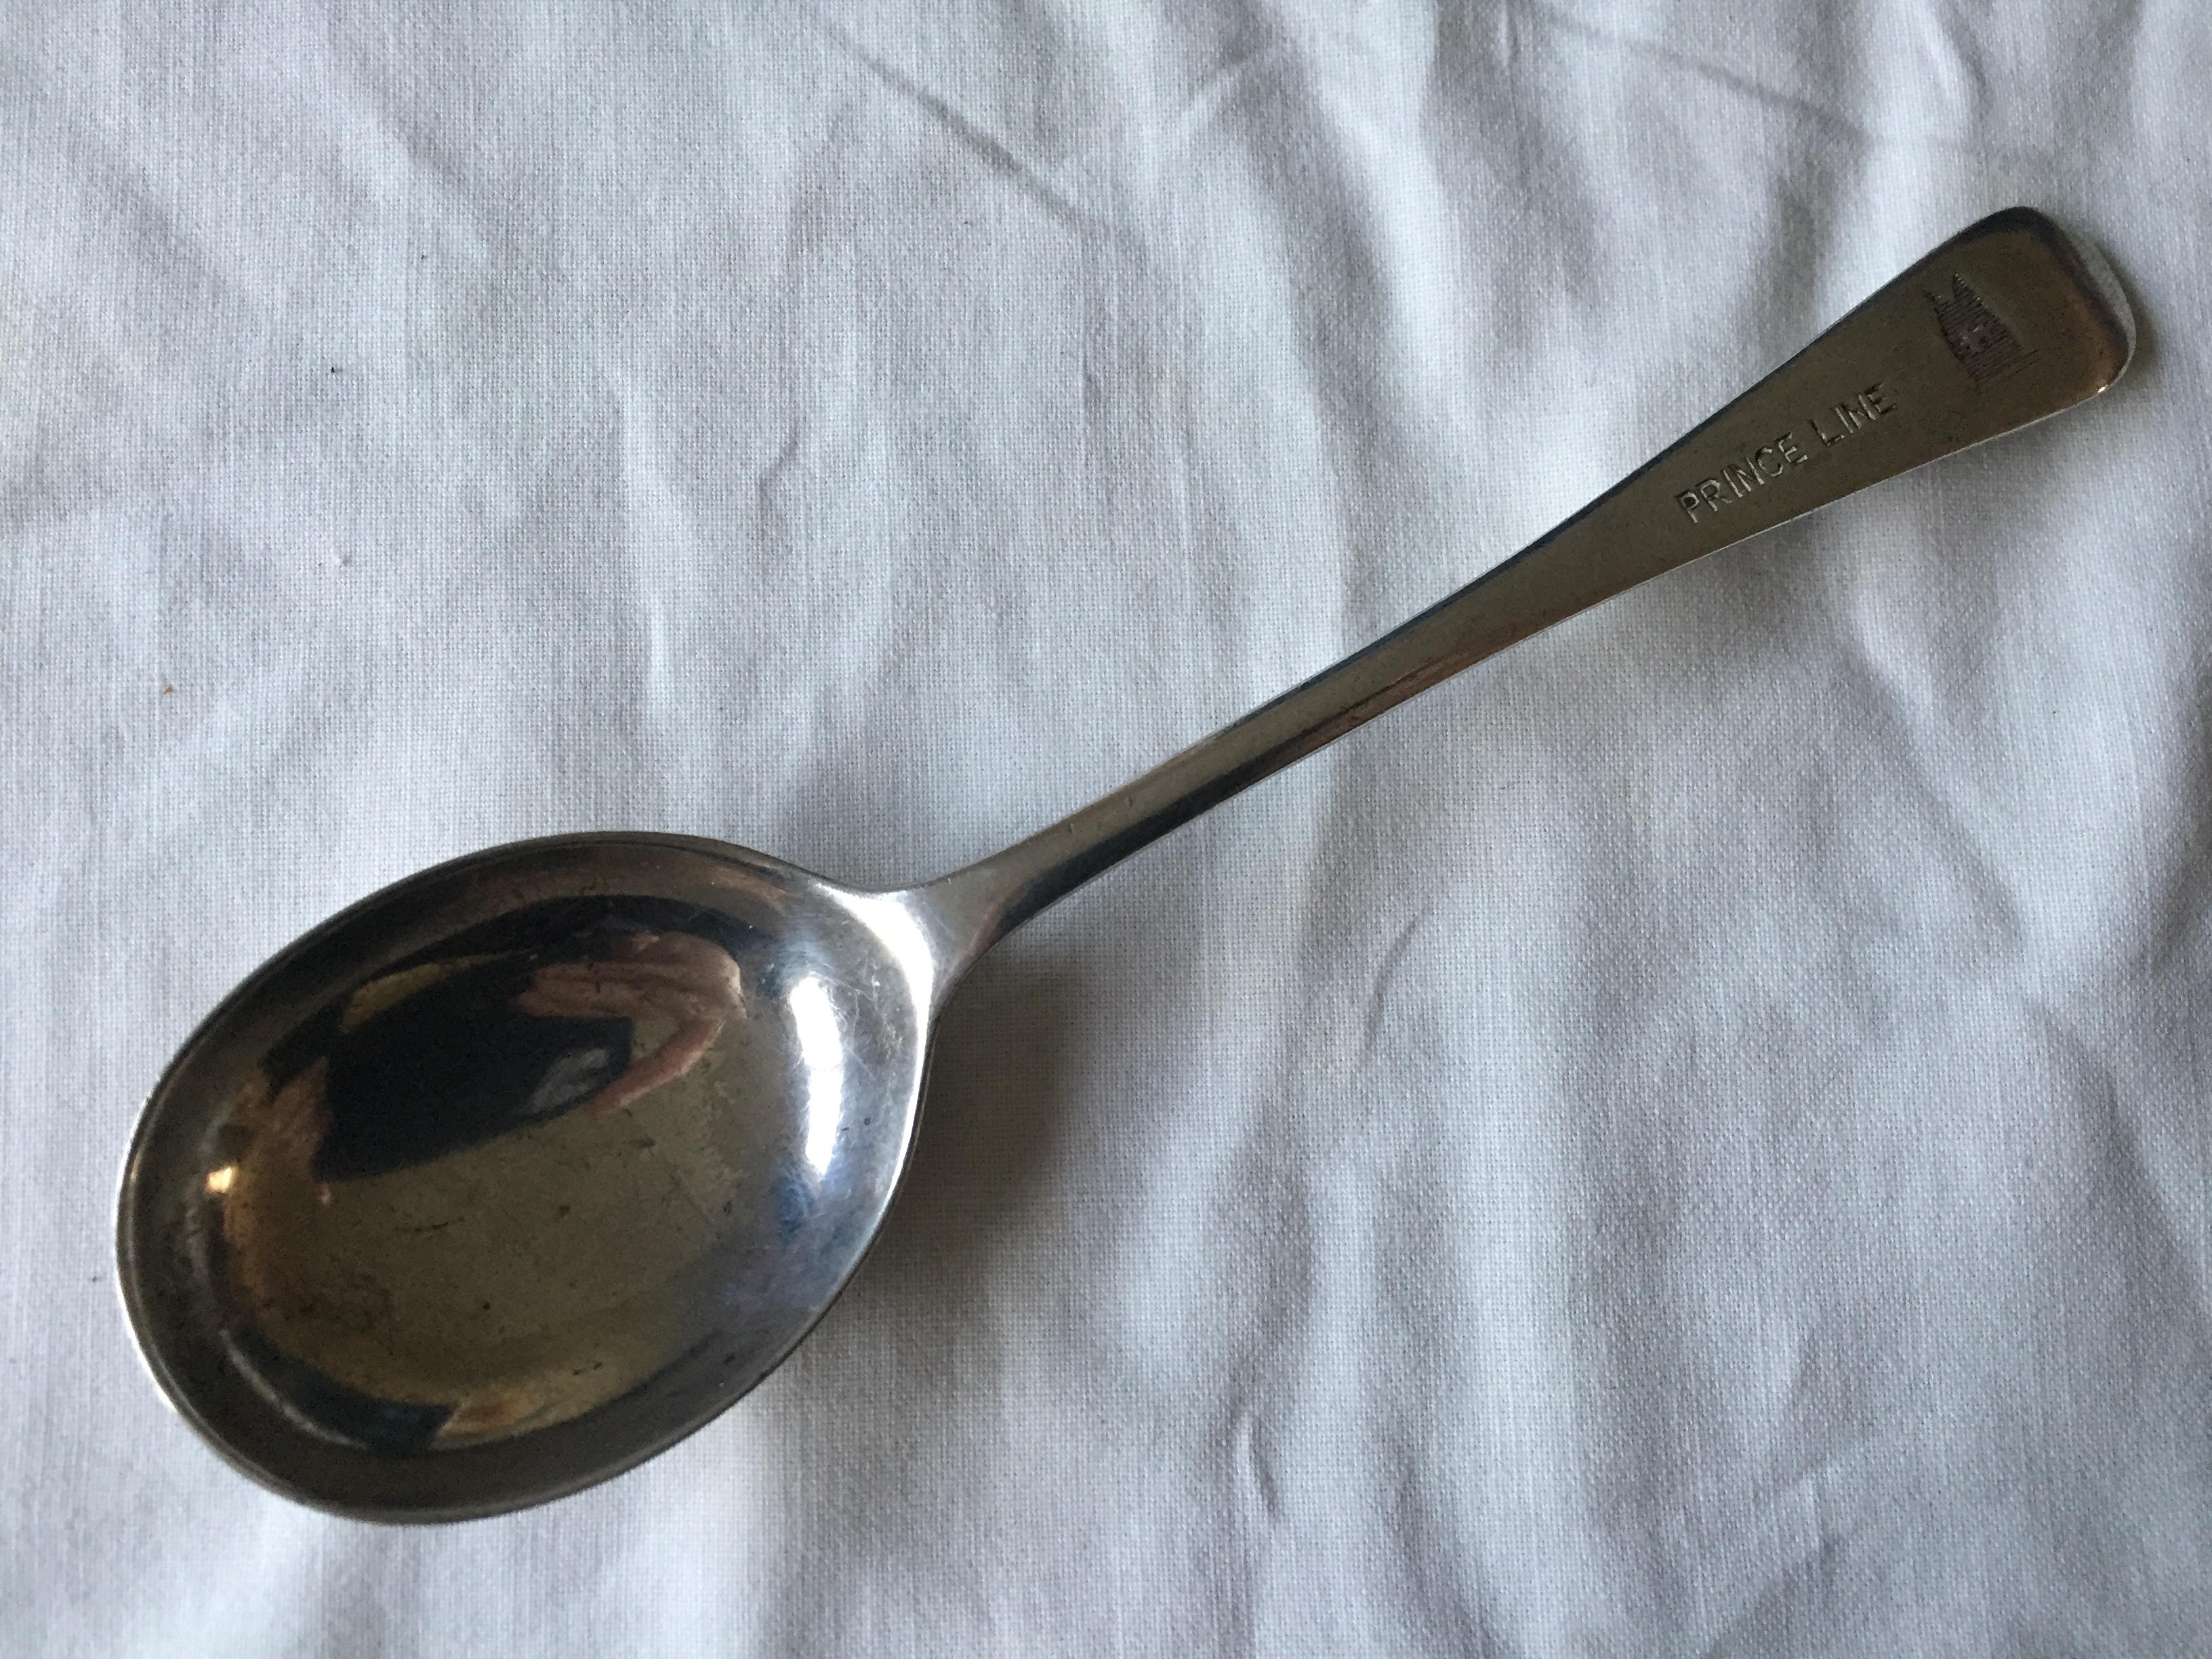 AS USED IN SERVICE SOUP SPOON FROM THE PRINCE LINE